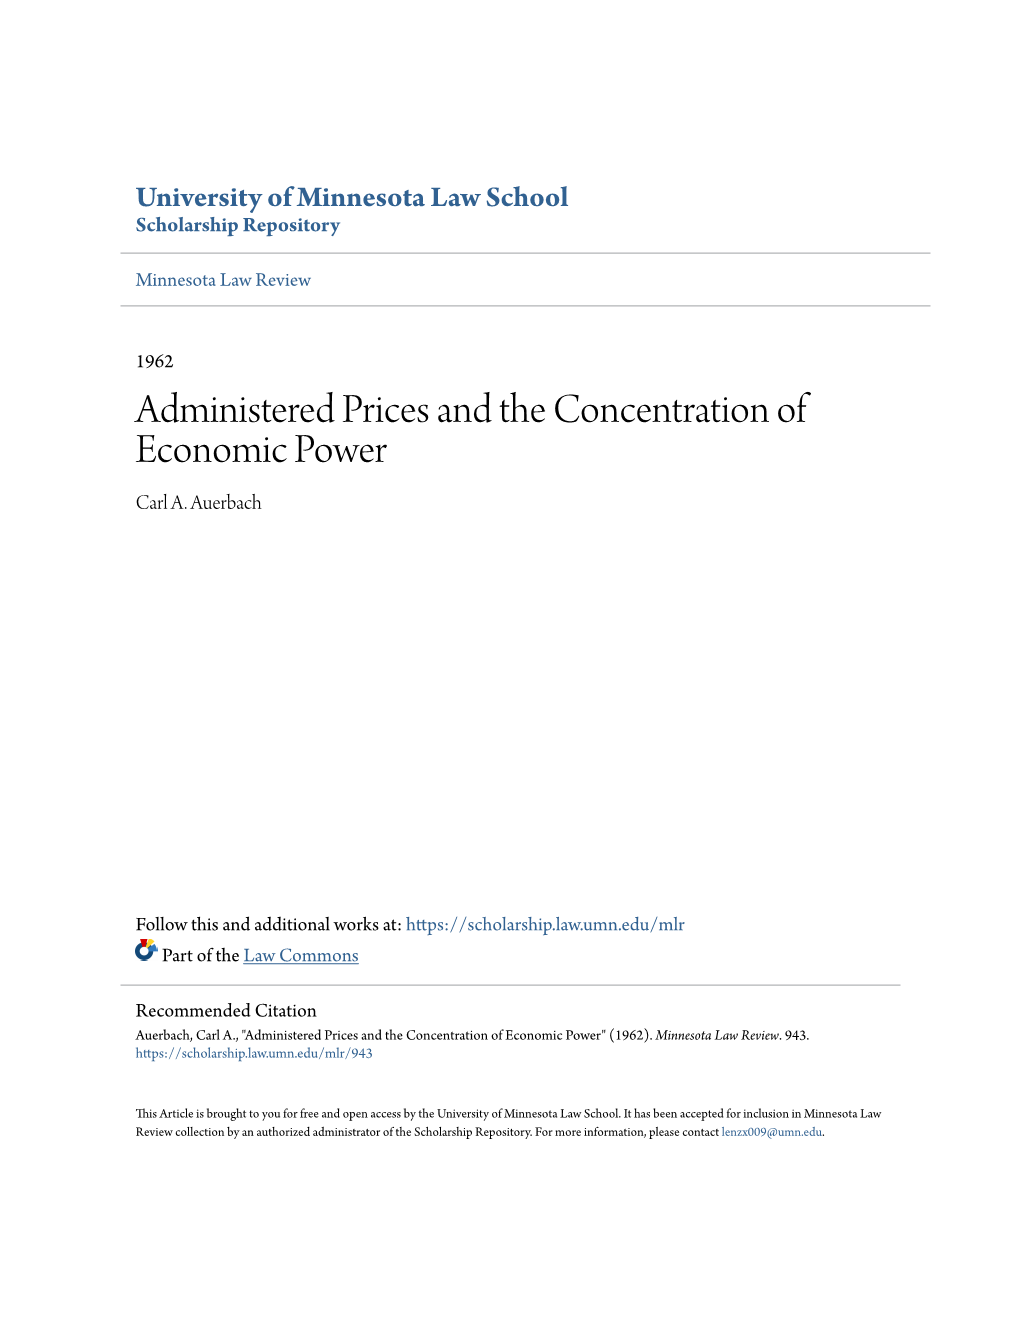 Administered Prices and the Concentration of Economic Power Carl A